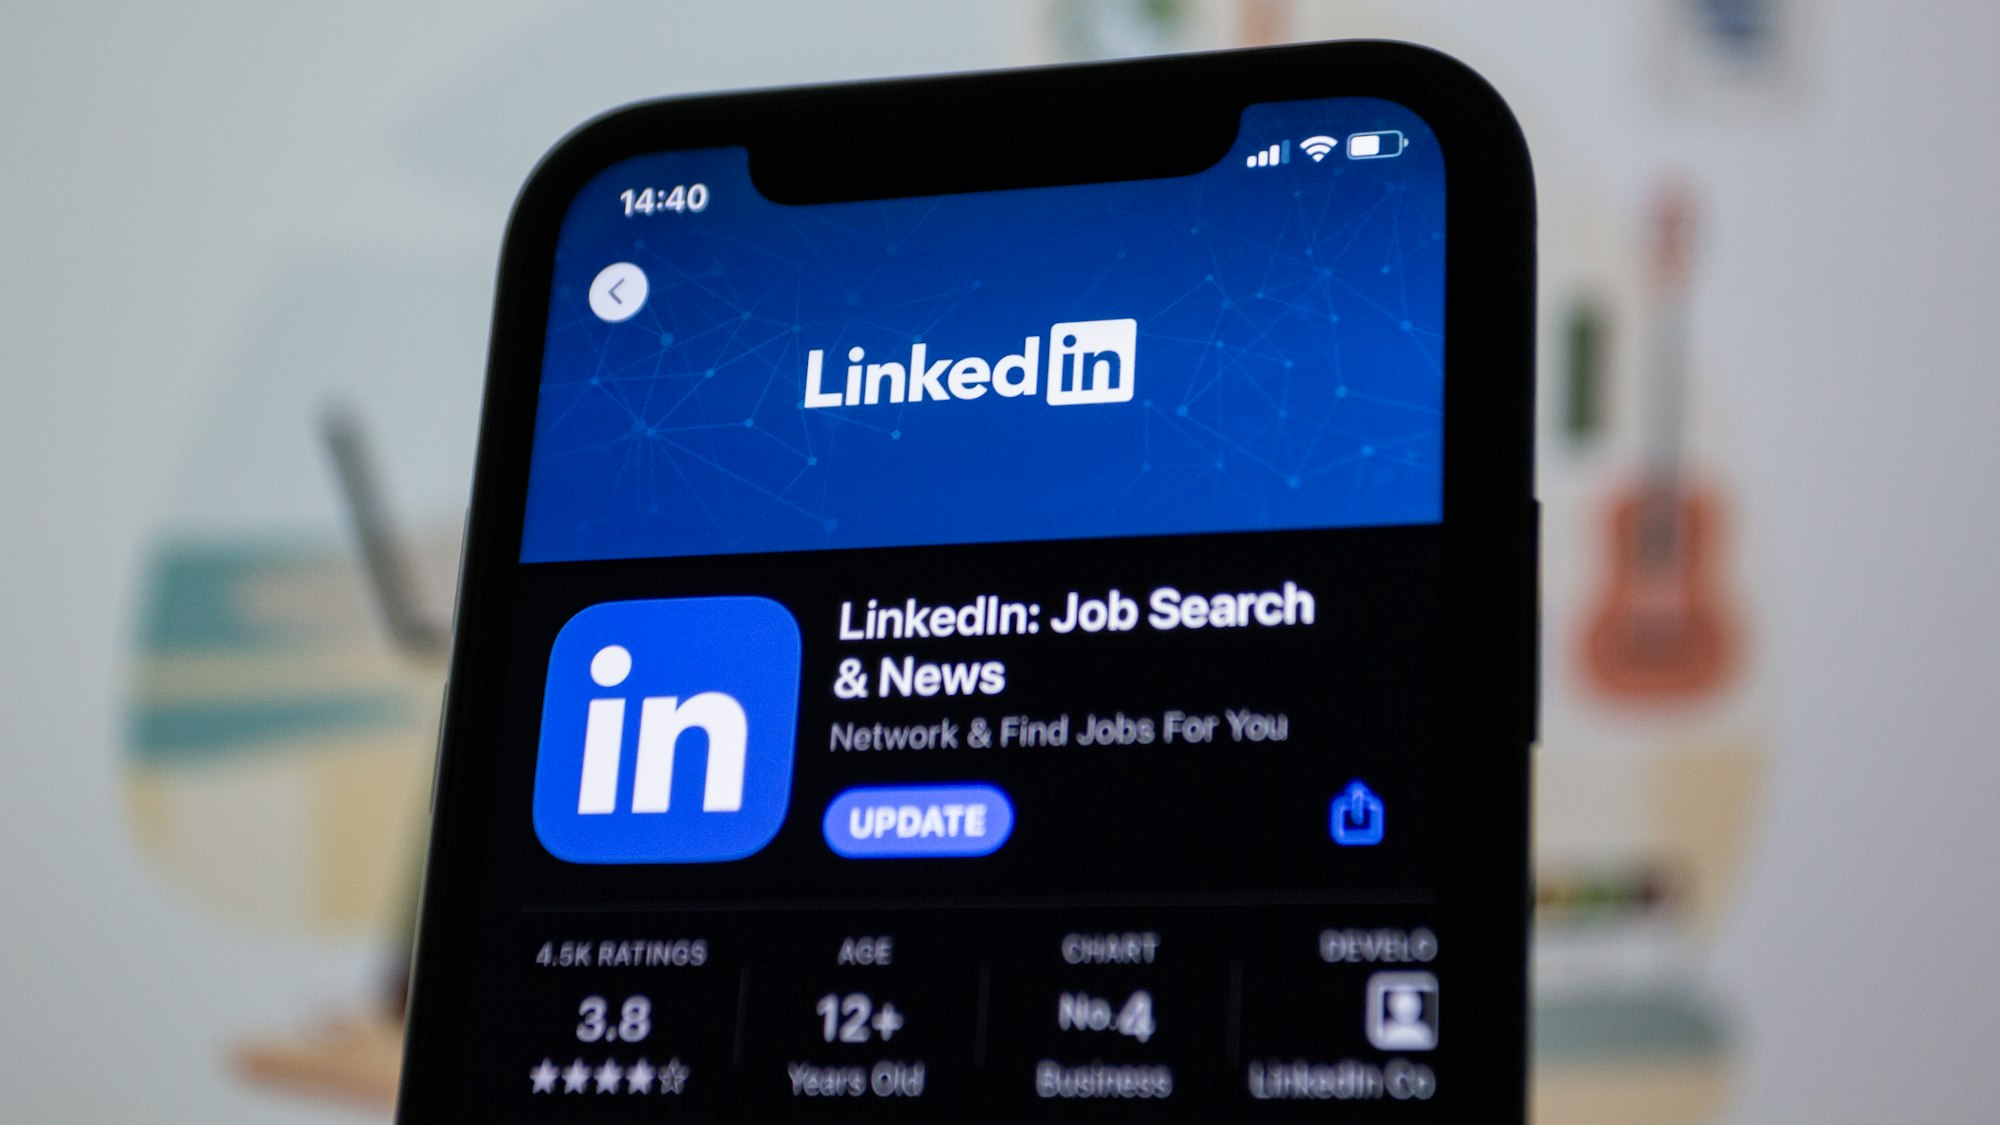 How to Delete a Post on LinkedIn